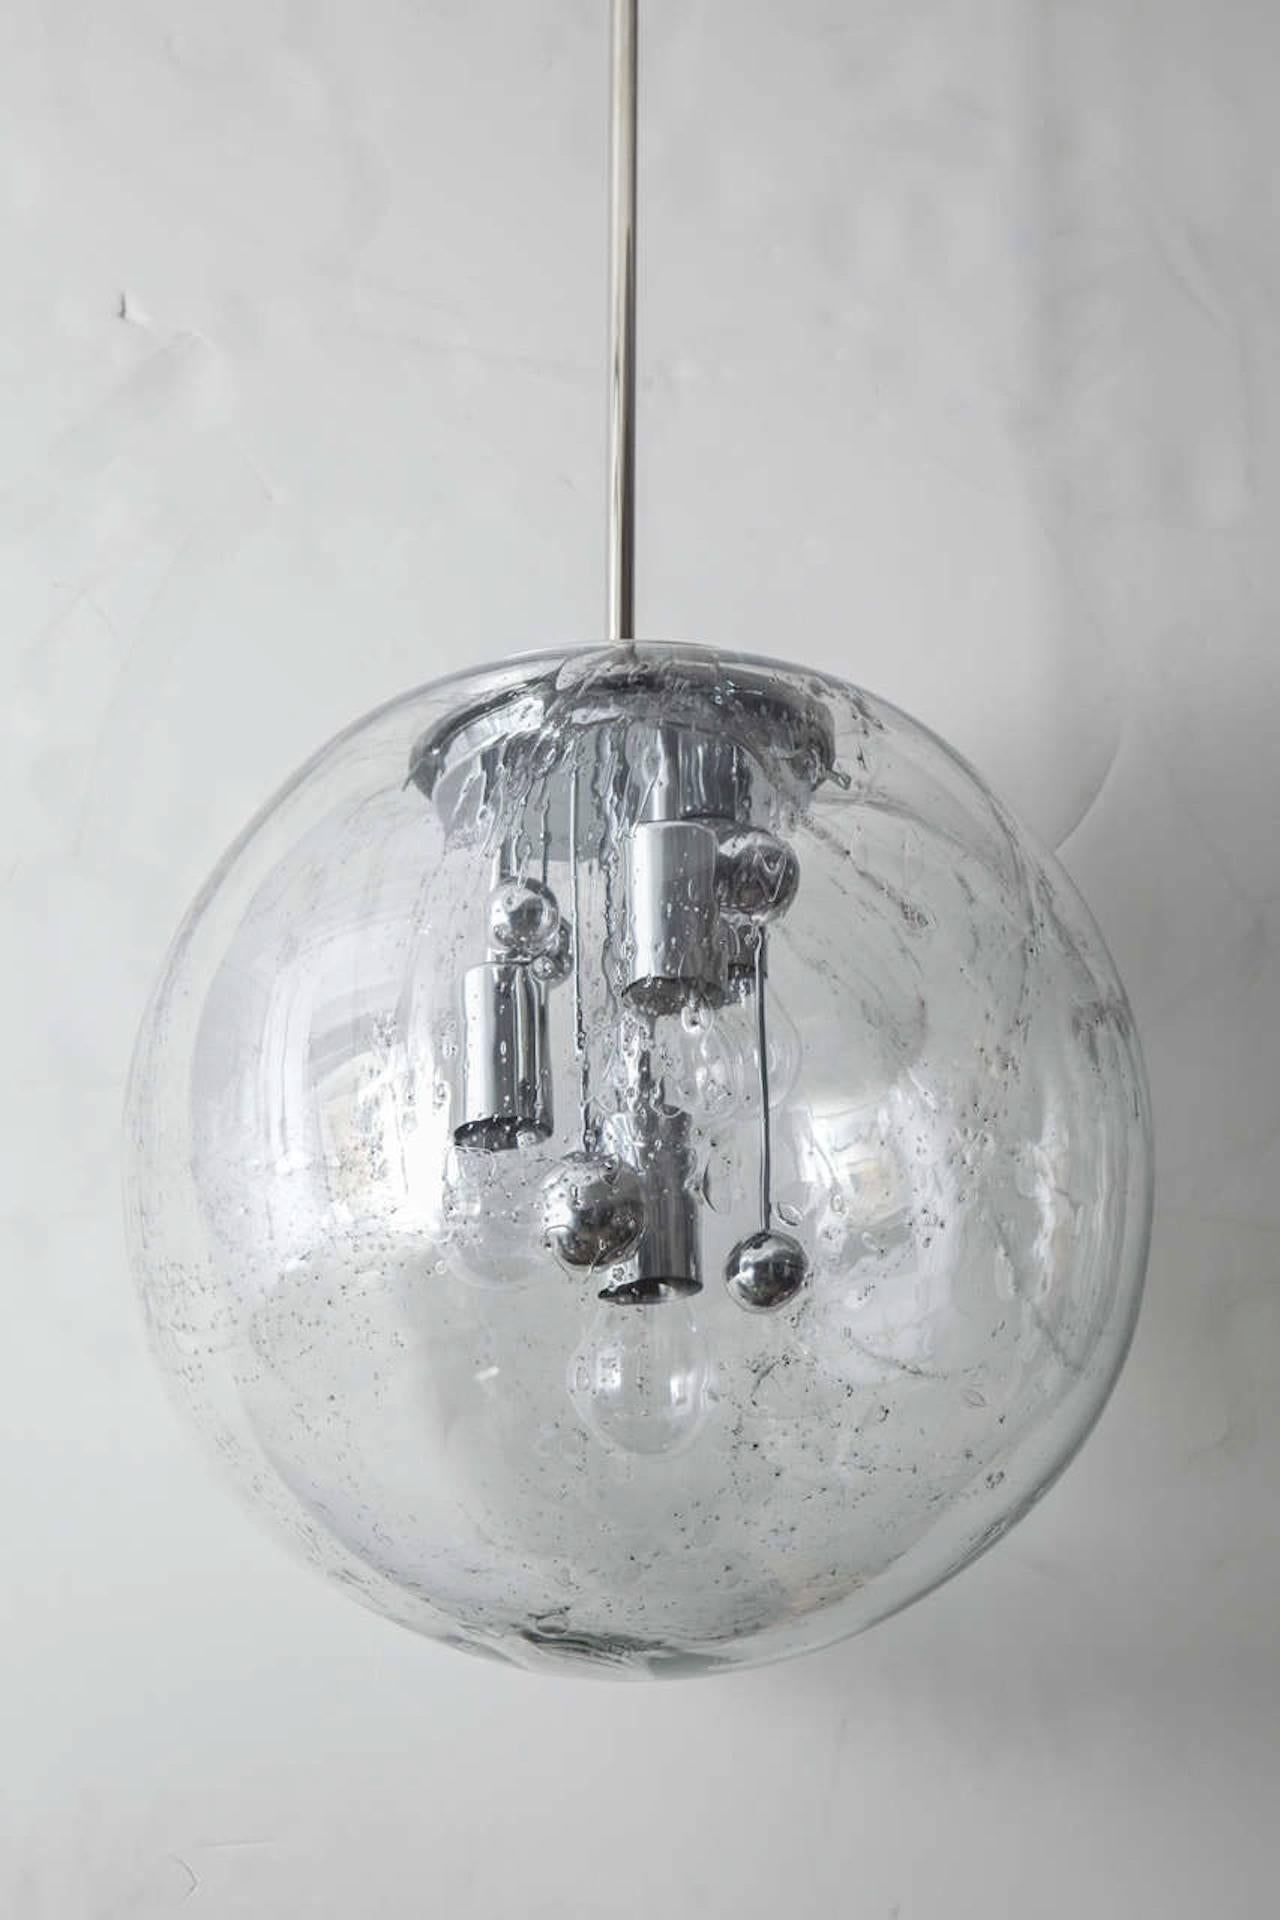 Extra large Murano glass globe with light grey glass veining inclusion. Pendant features four-light sources and suspended chrome sputnik spheres. Rewired for use in the USA.

1 in Chrome finish
1 in Brass finish